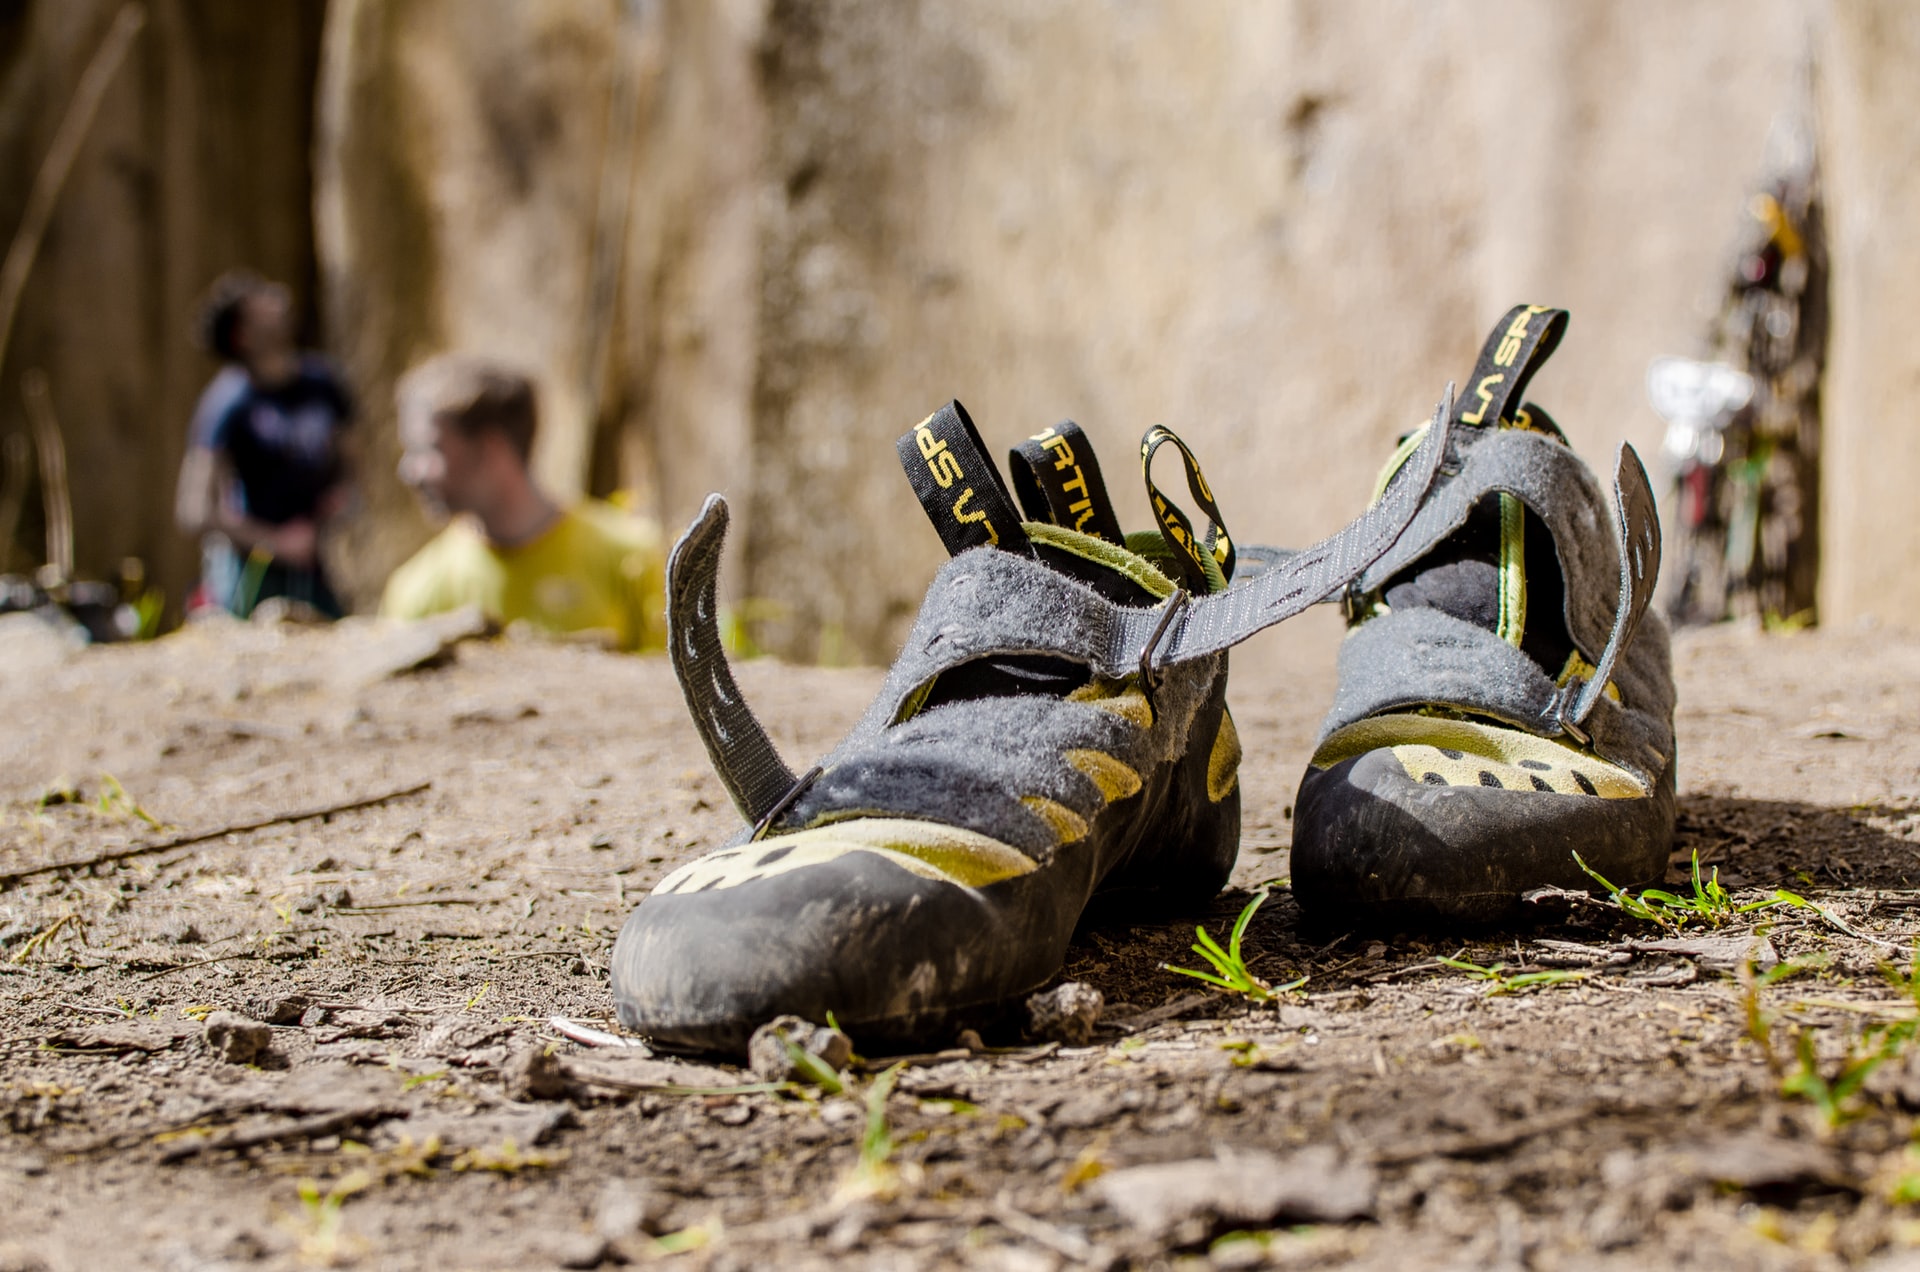 climbing shoes are an important piece of bouldering gear